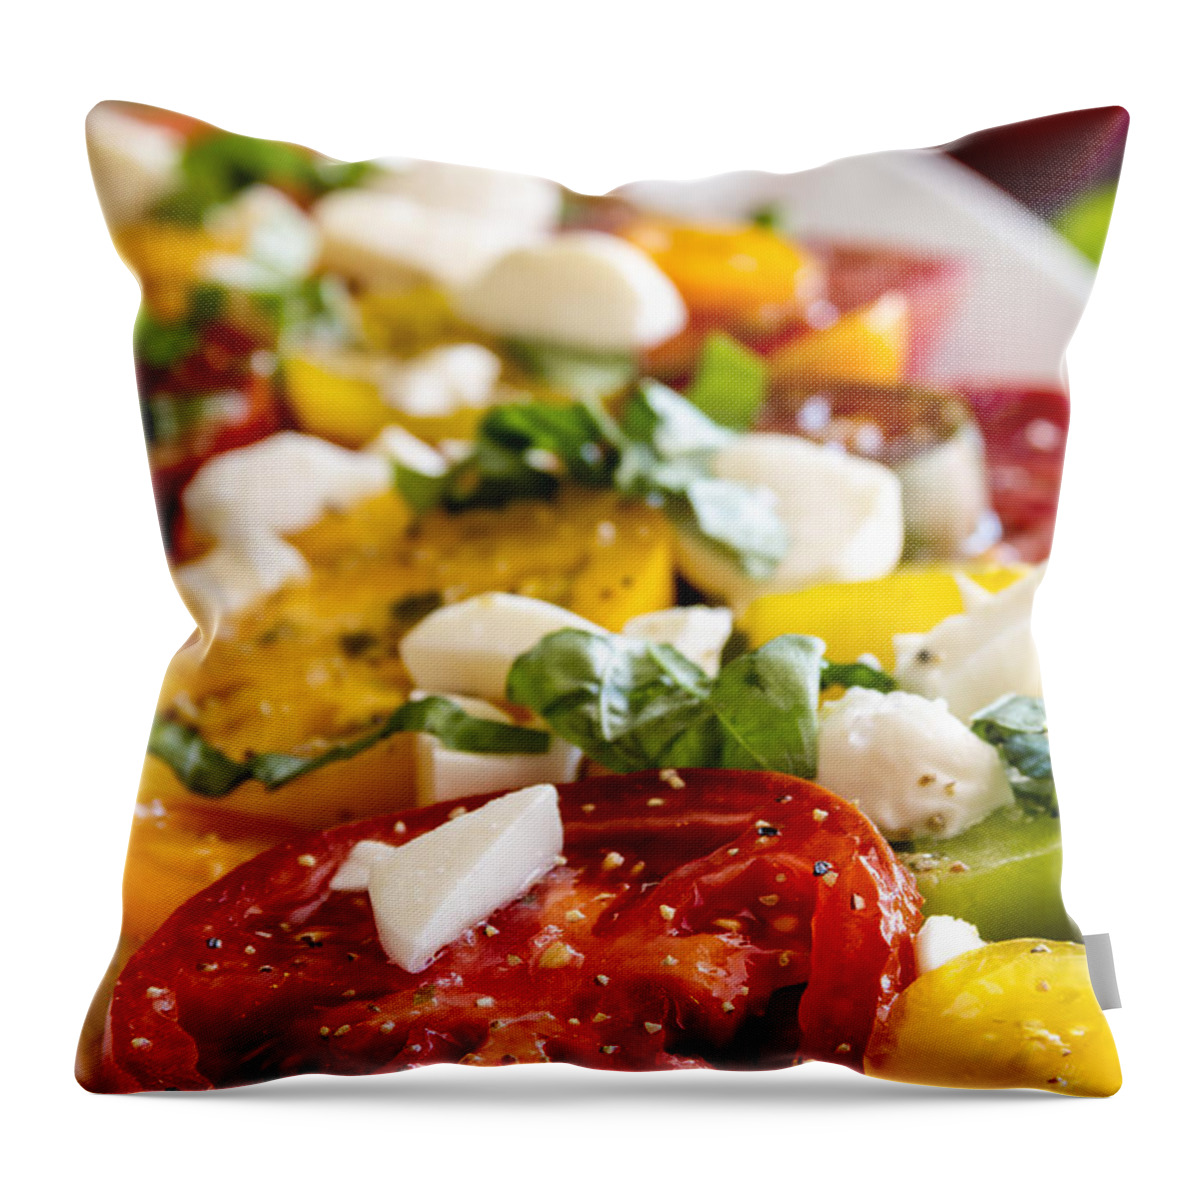 Autumn Throw Pillow featuring the photograph Tomatoes, Basil and Cheese by Teri Virbickis